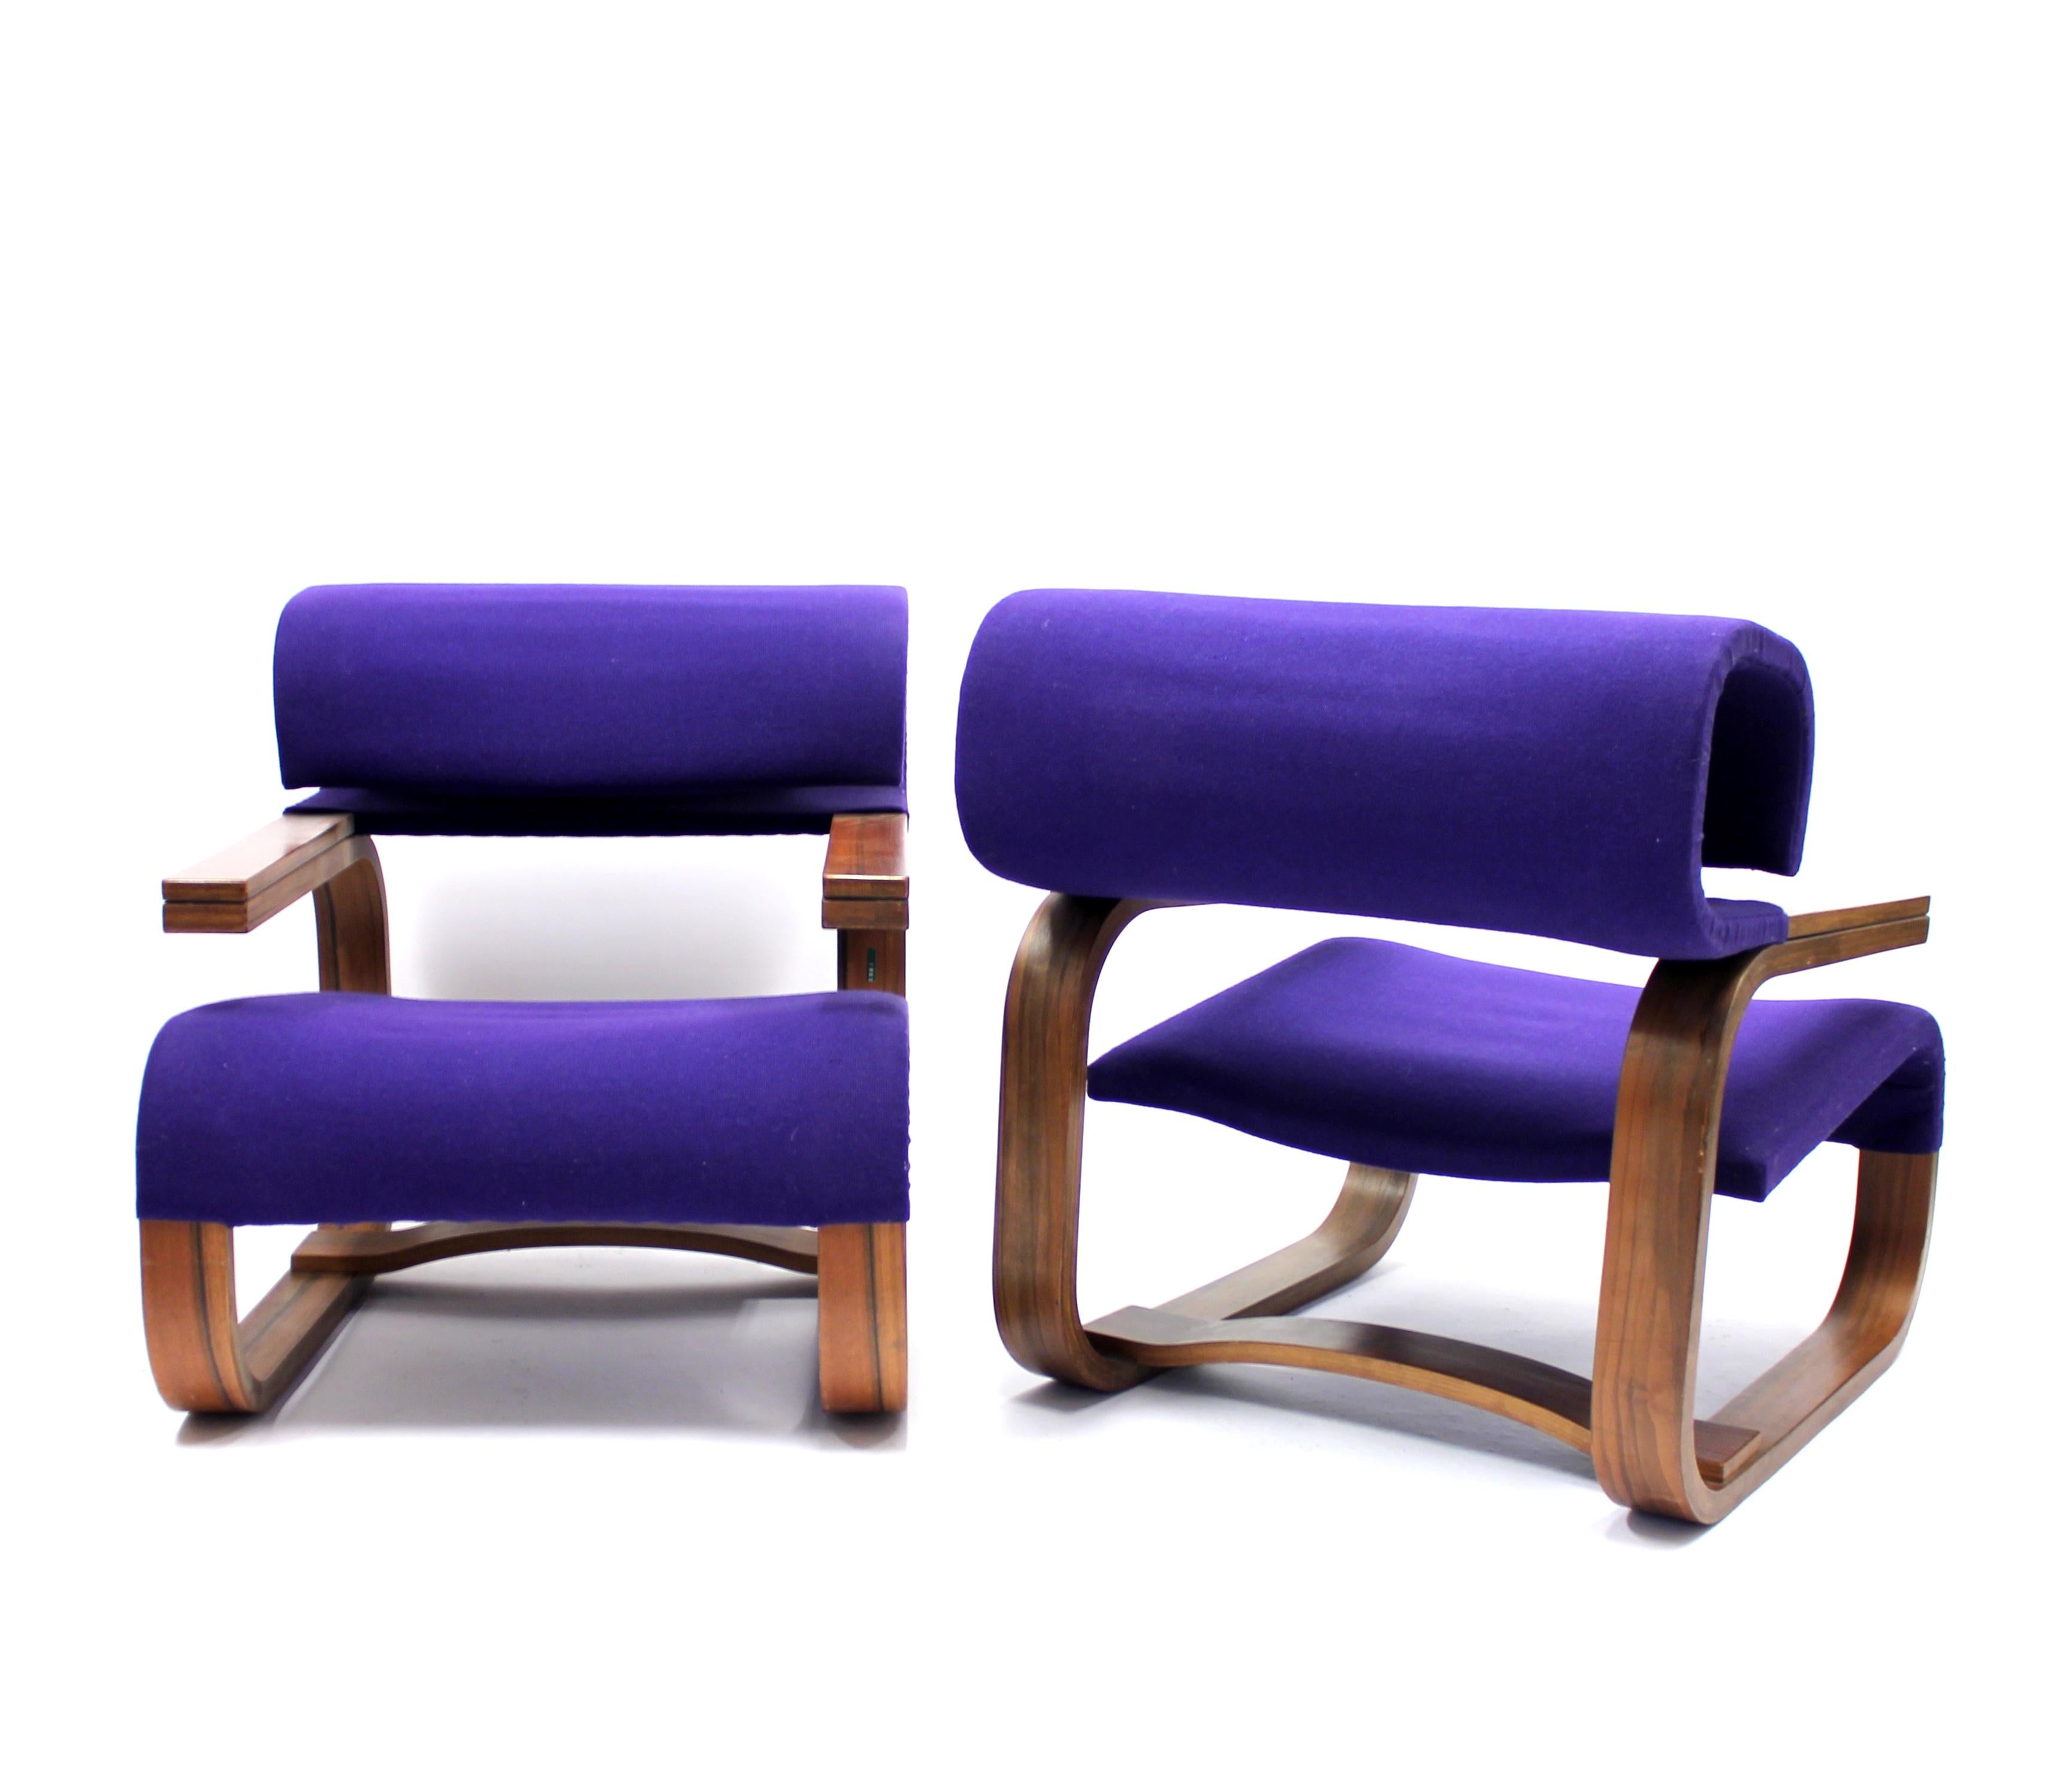 Late 20th Century Pair of Chairs by Jan Bočan for the Czechoslovakian Embassy, Stockholm, 1972